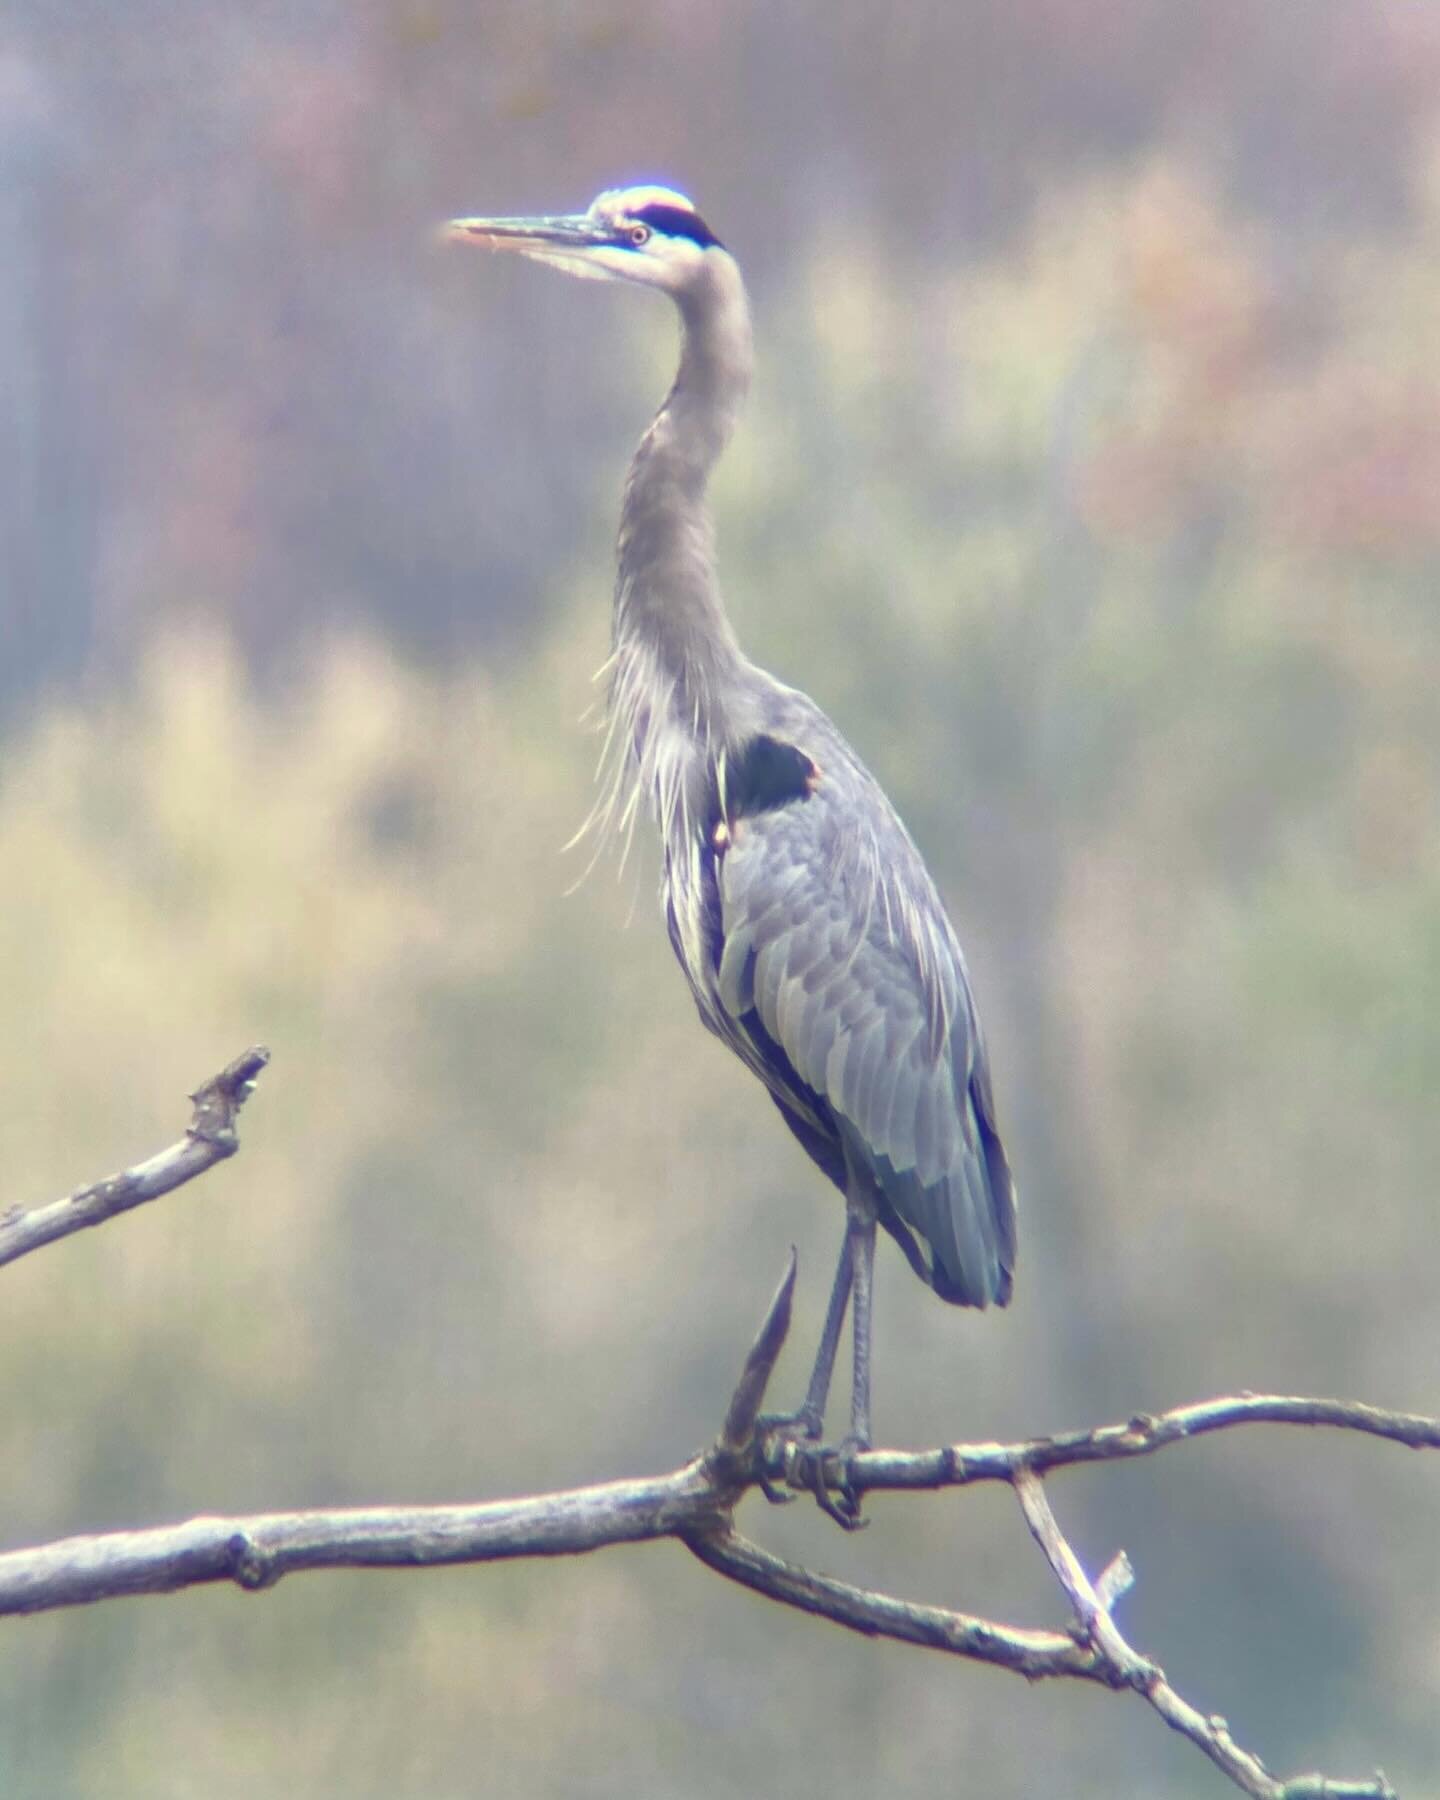 &ldquo;Hunting Great Blue Herons wade slowly or stand statue-like, stalking fish and other prey in shallow water or open fields. Watch for the lightning-fast thrust of the neck and head as they stab with their strong bills. Their very slow wingbeats,